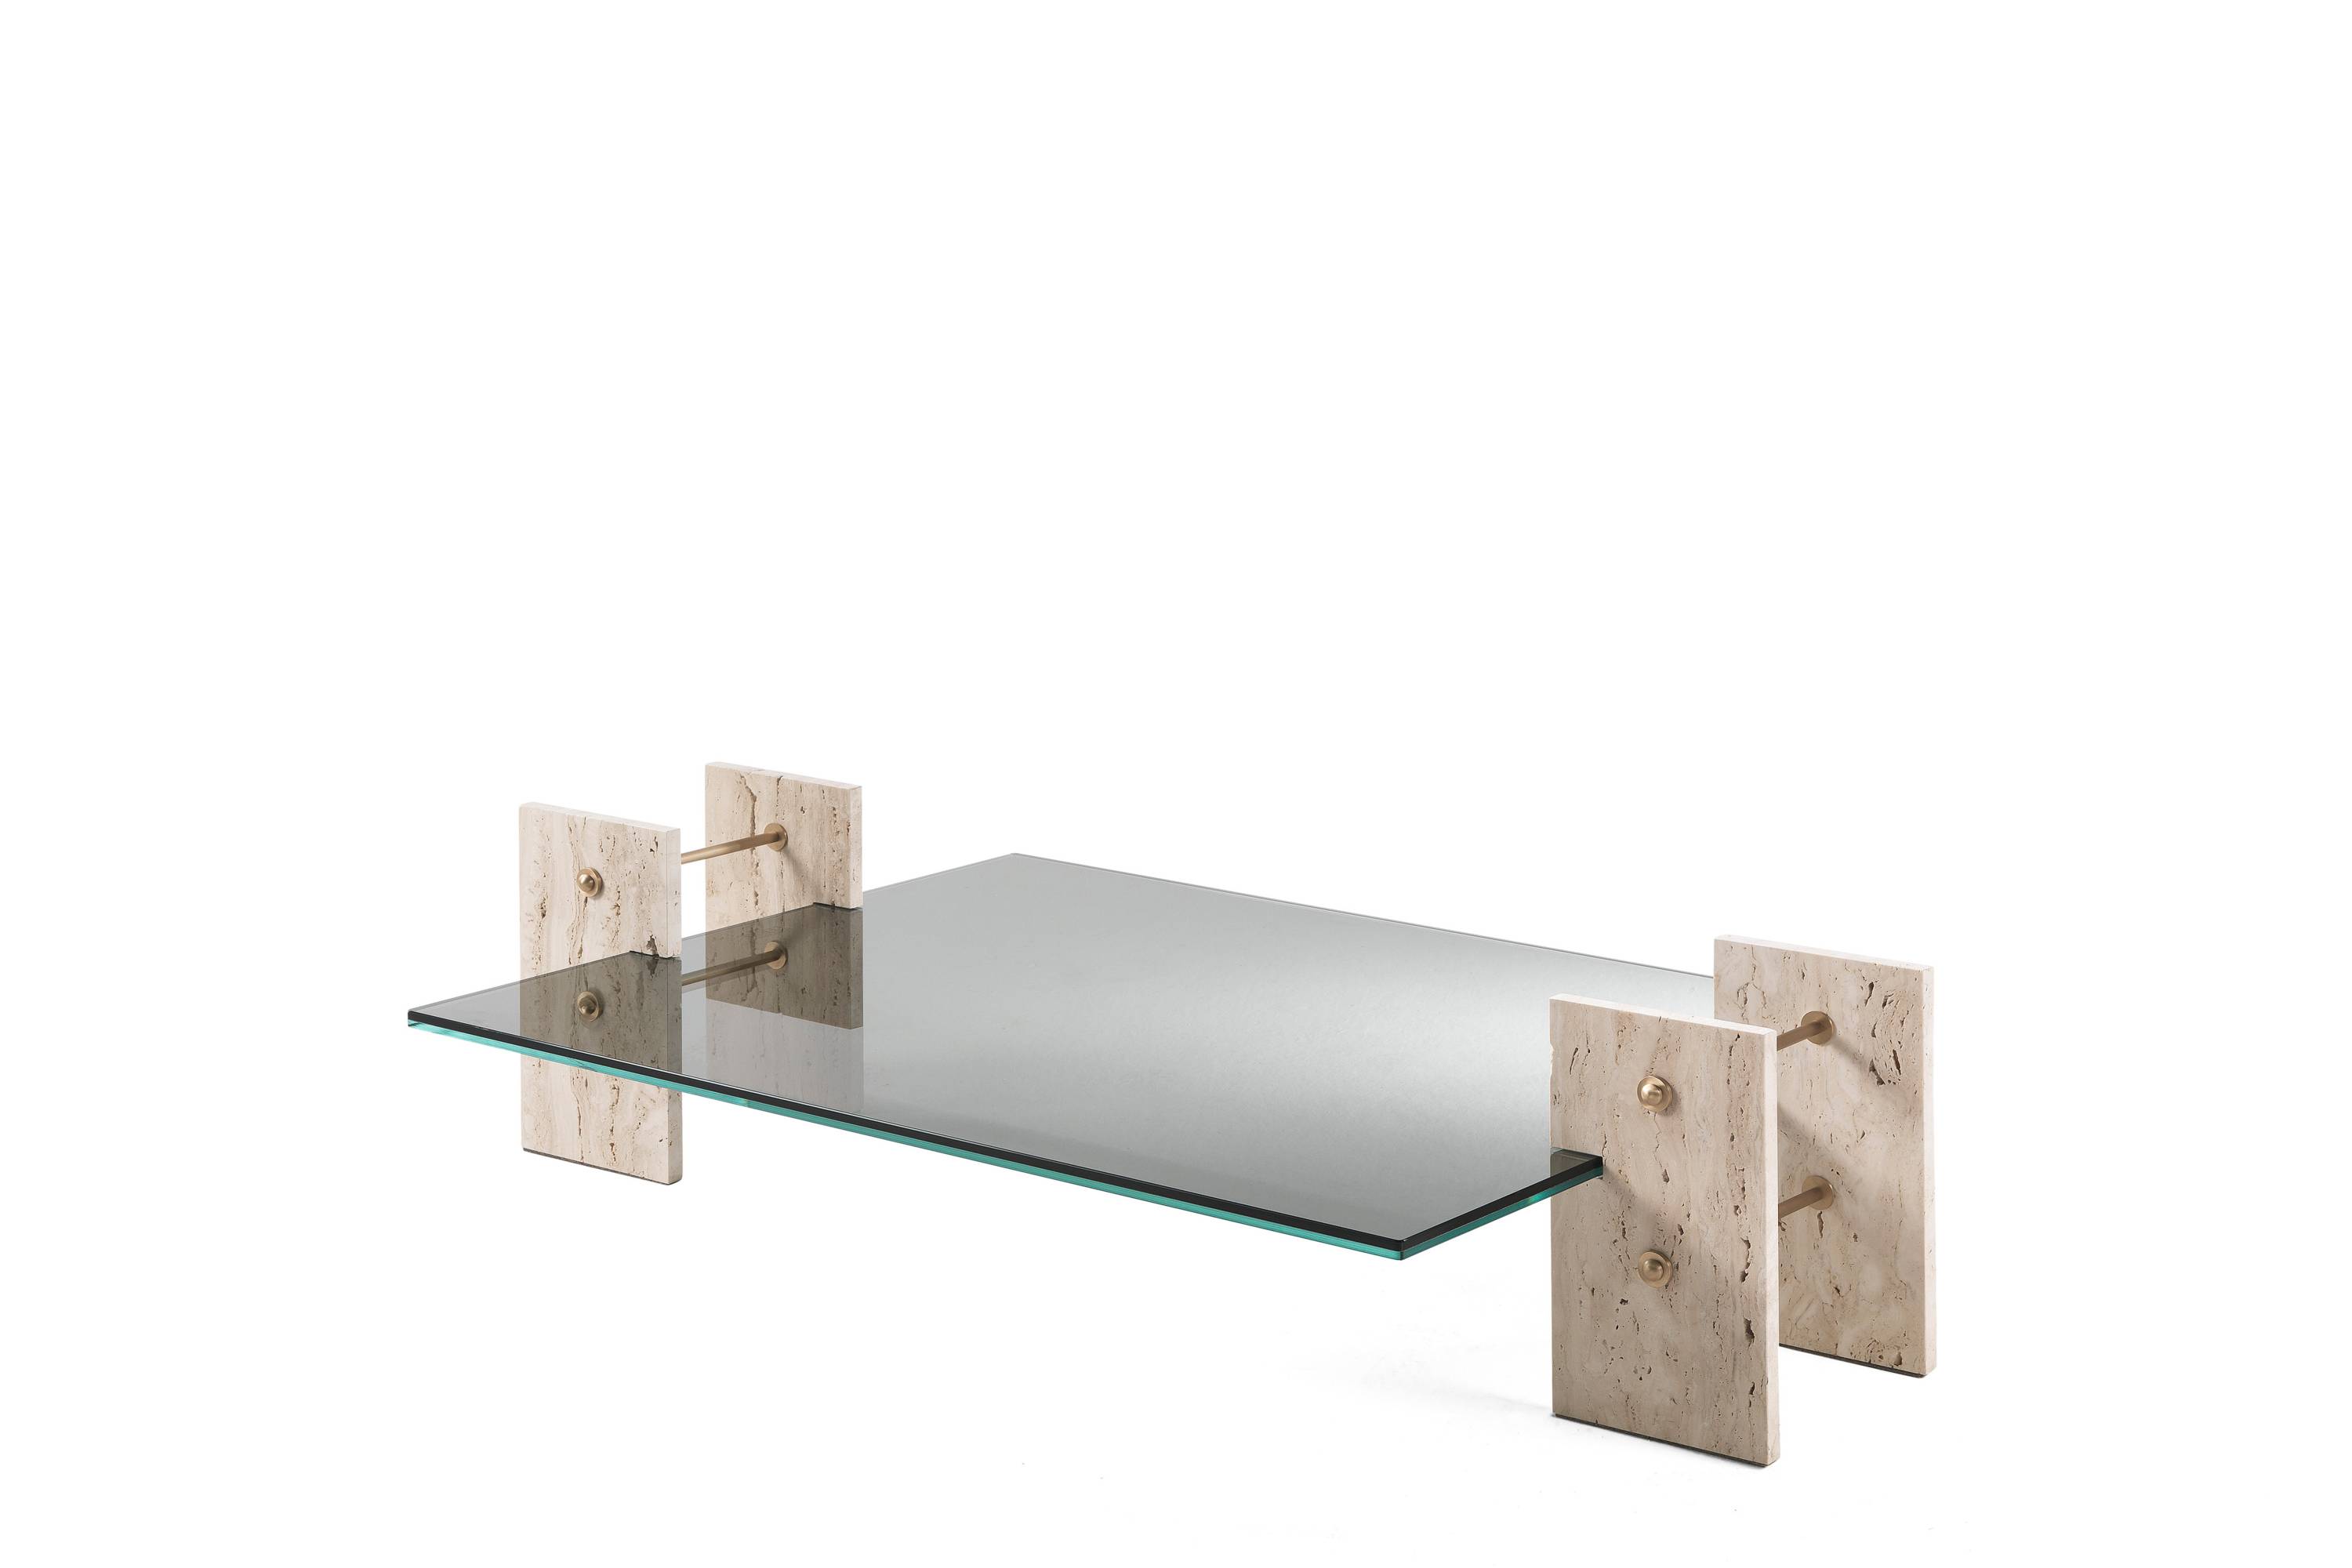 GFH_FITZROY_central-table_FIT.232.AIG_2019_02.jpg